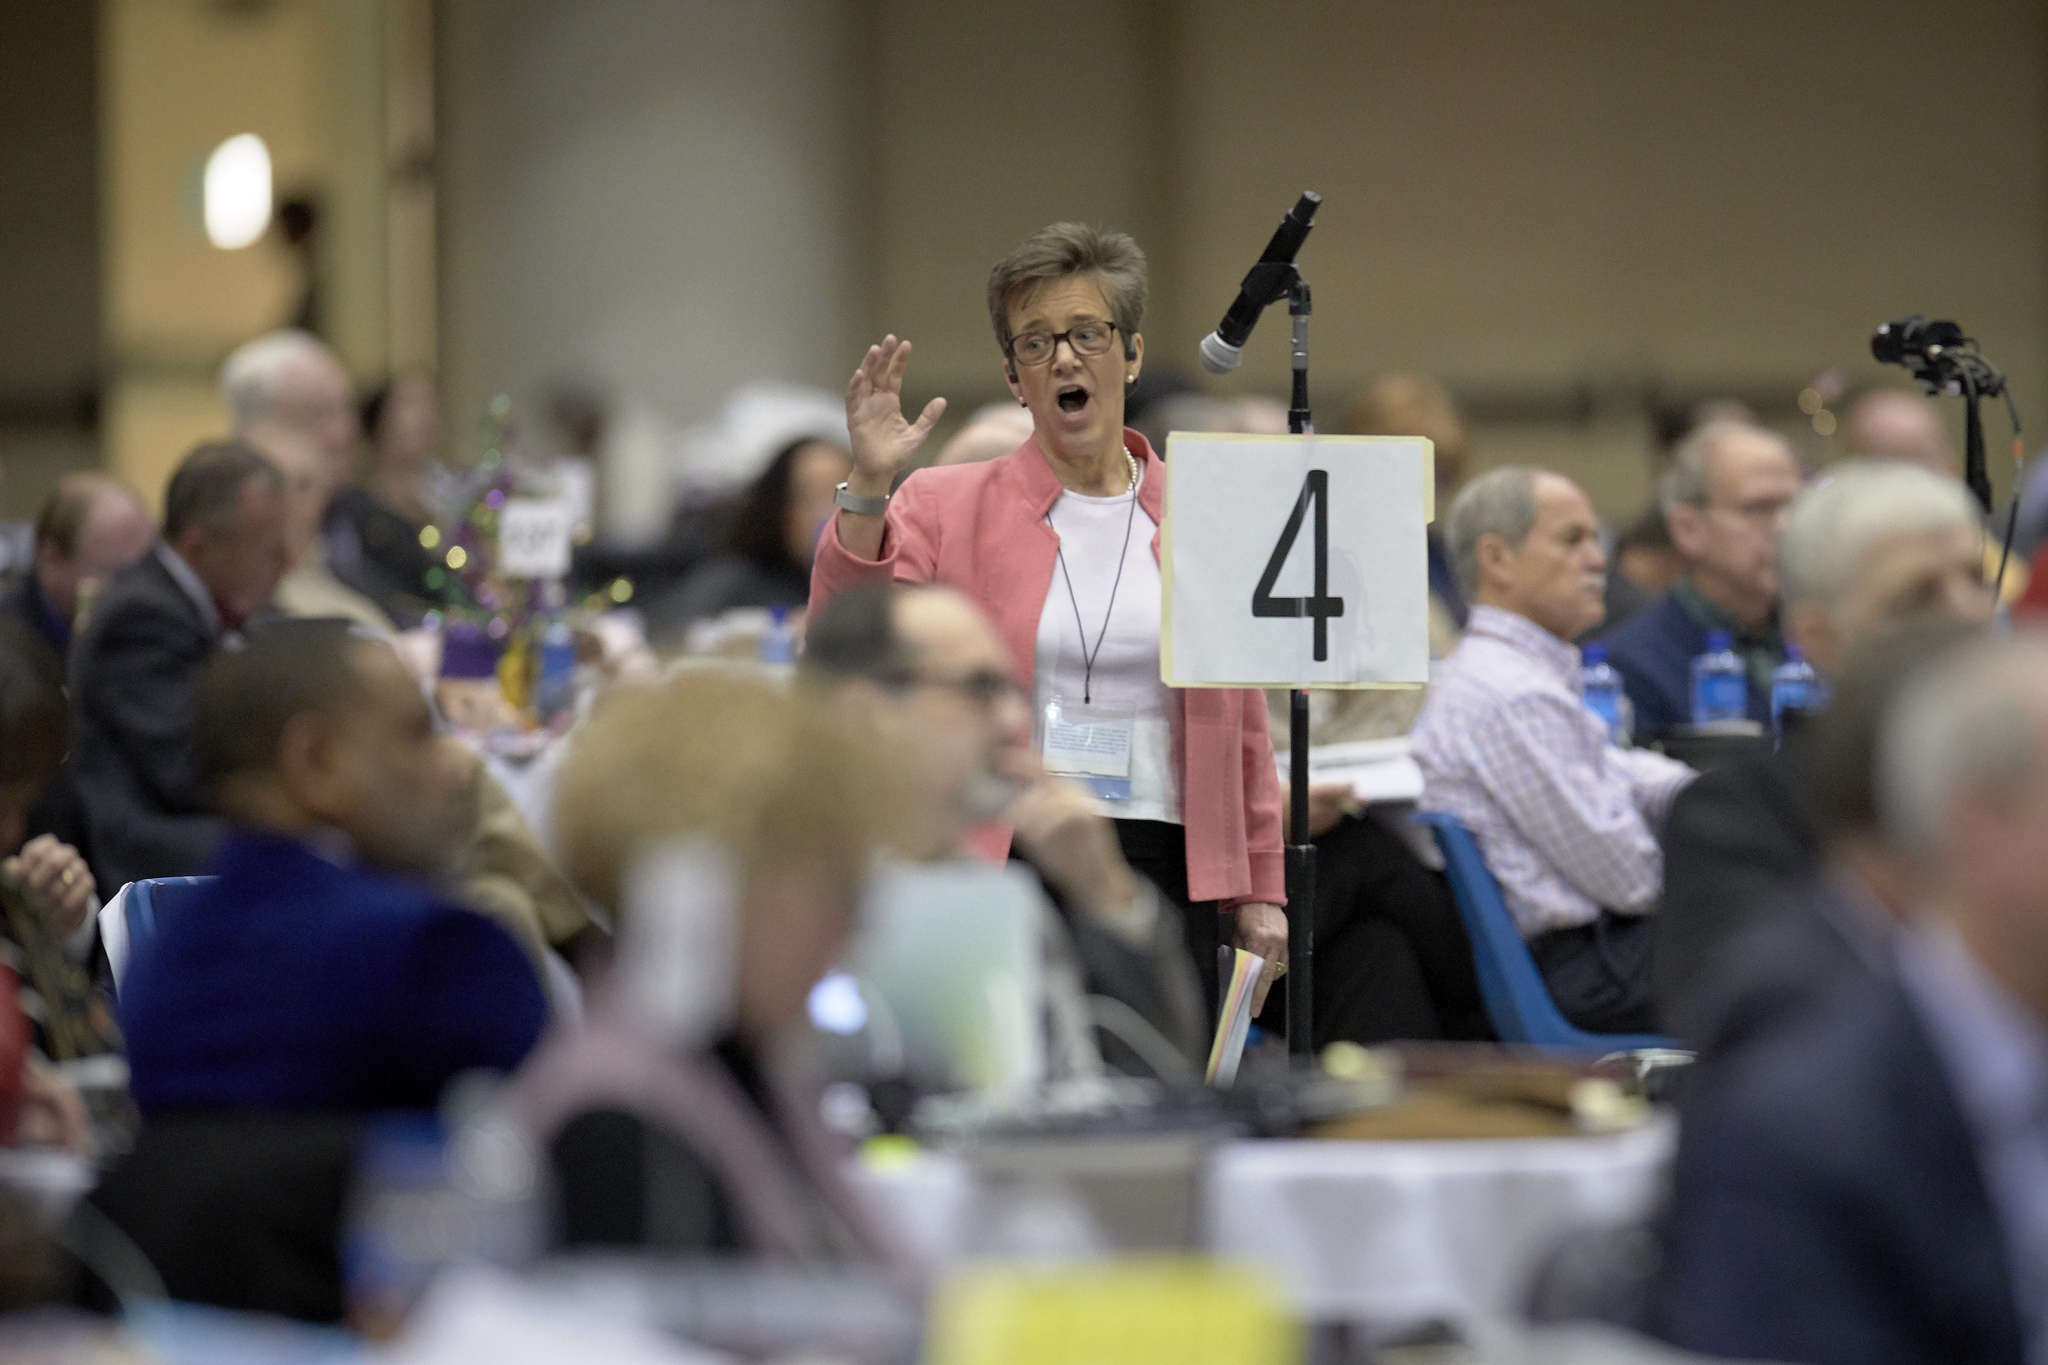 The Rev. Rebekah Miles, an Arkansas Conference delegate, speaks at the 2019 United Methodist General Conference in St. Louis. Miles spoke in favor of postponing a discussion of the Traditional Plan, which she opposes. Photo by Paul Jeffrey, UMNS.